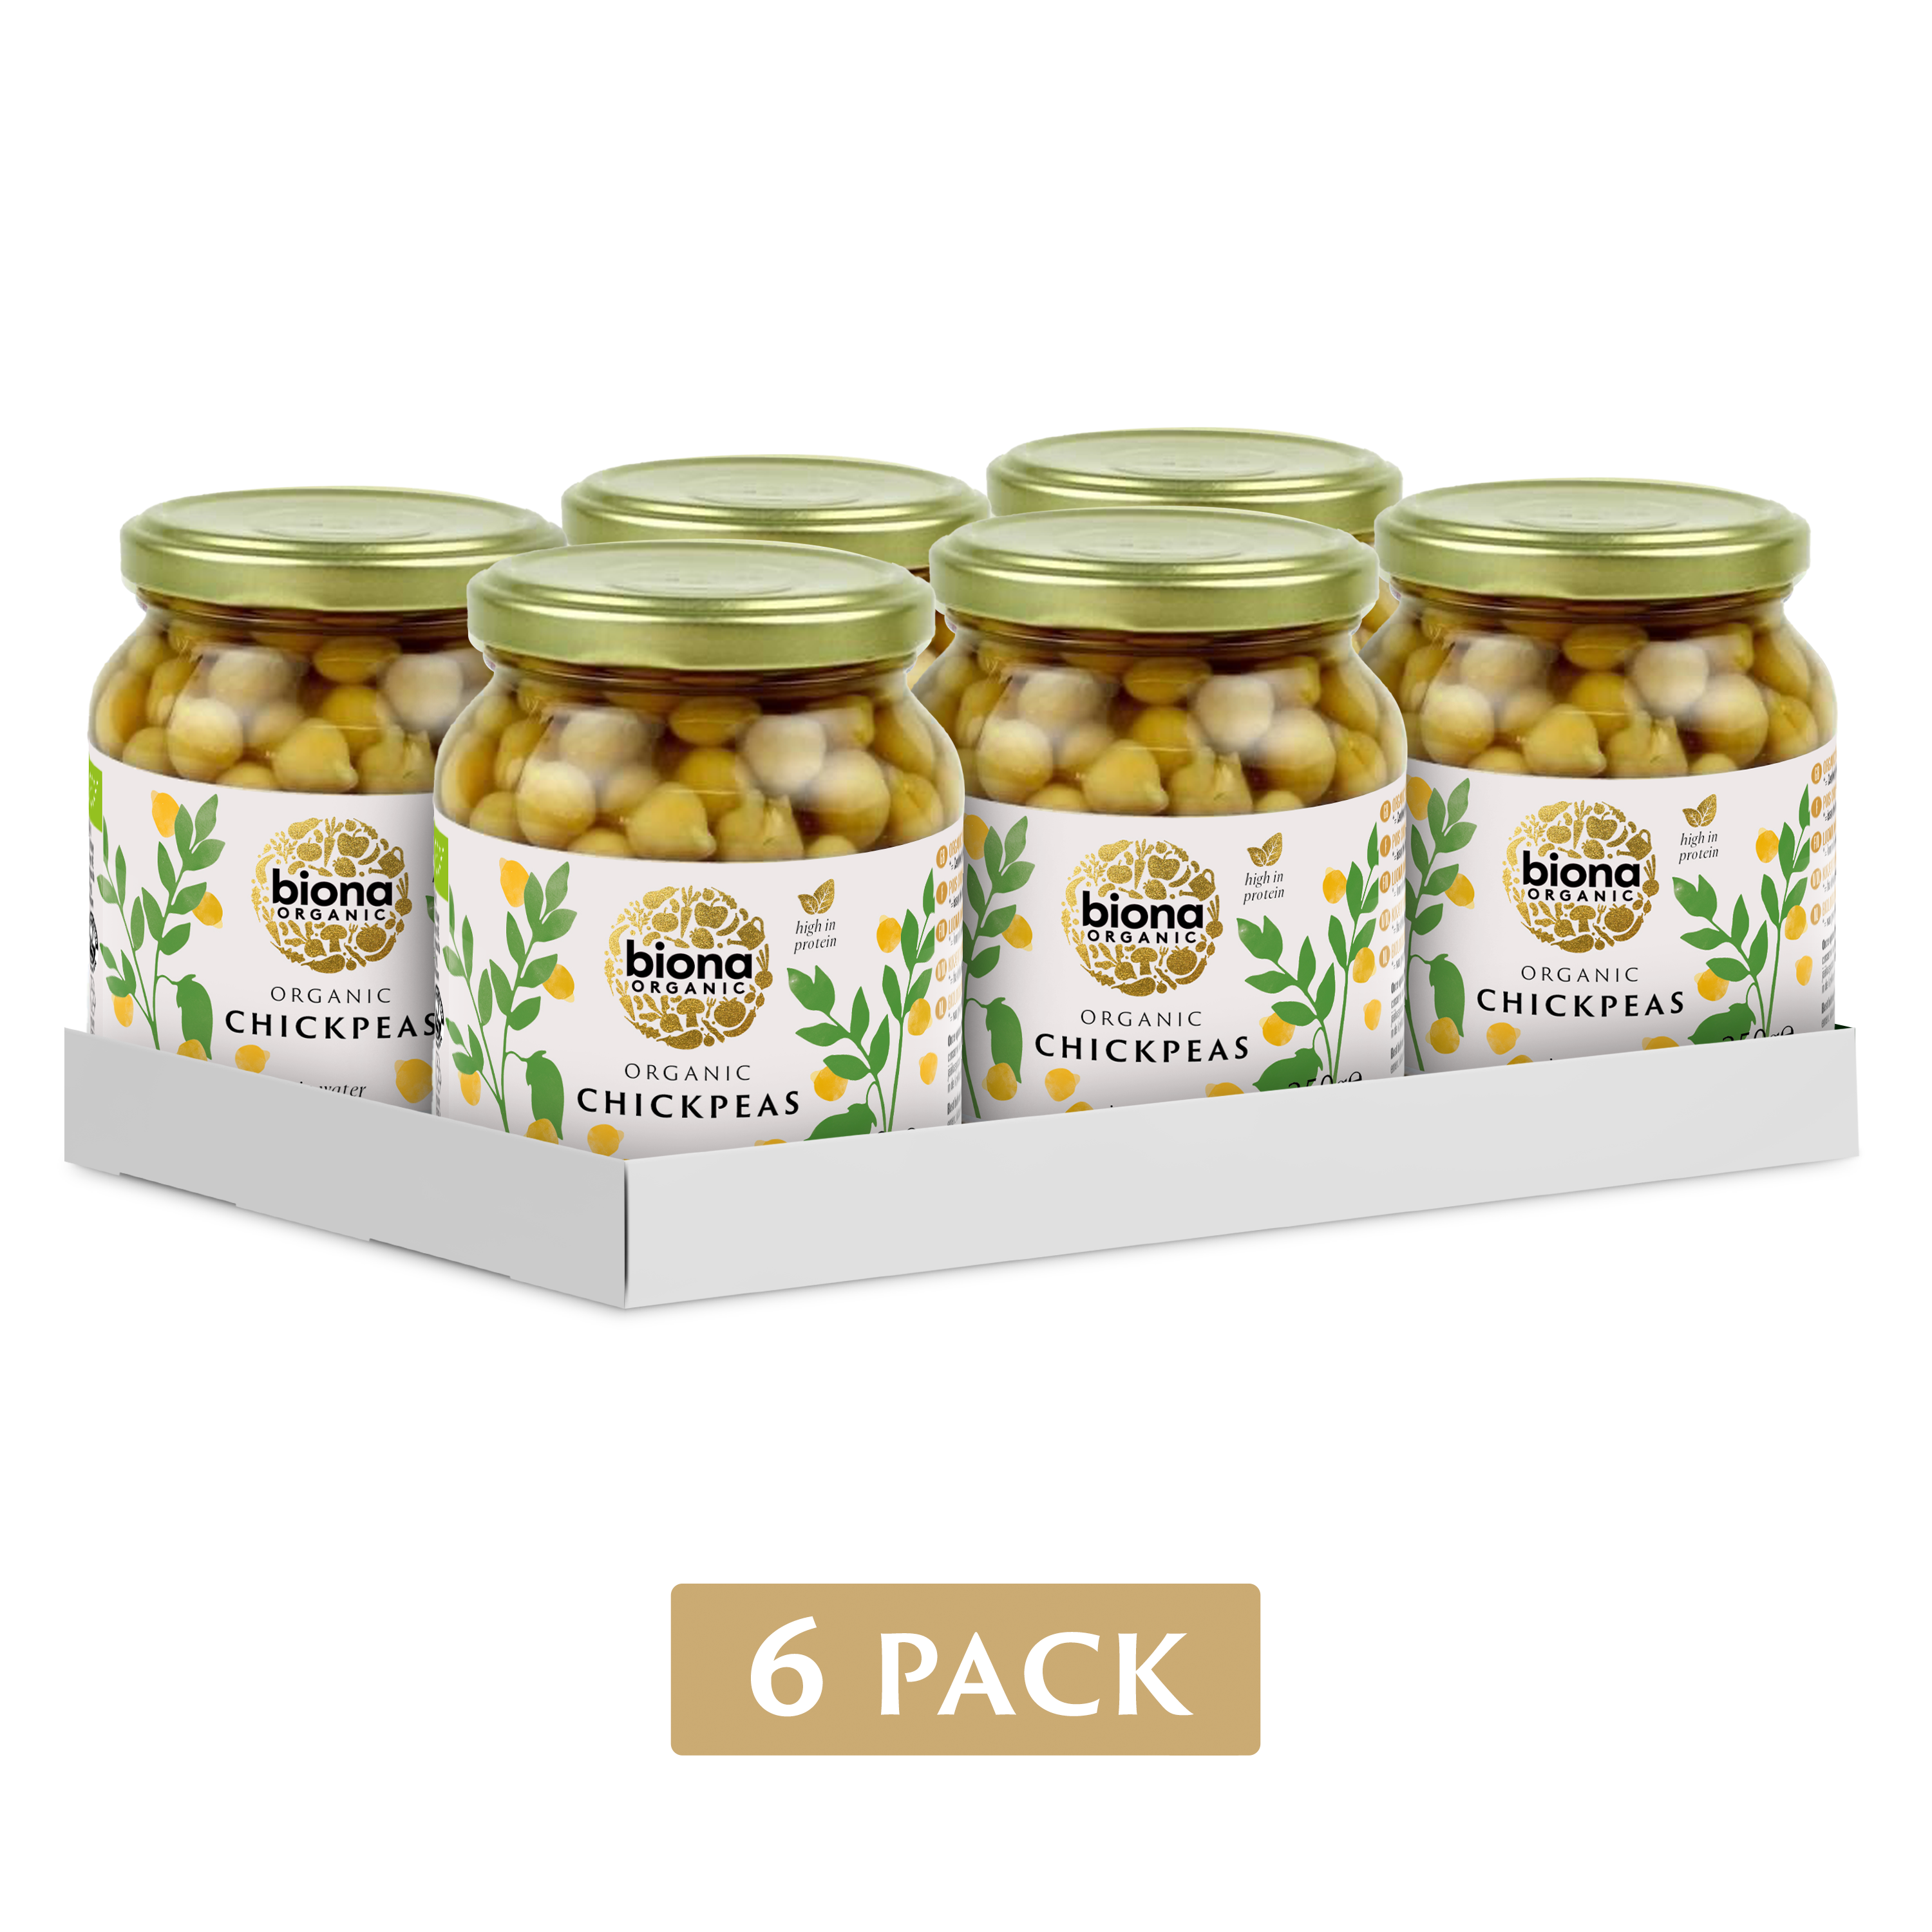 CHICK PEAS - 6 PACK